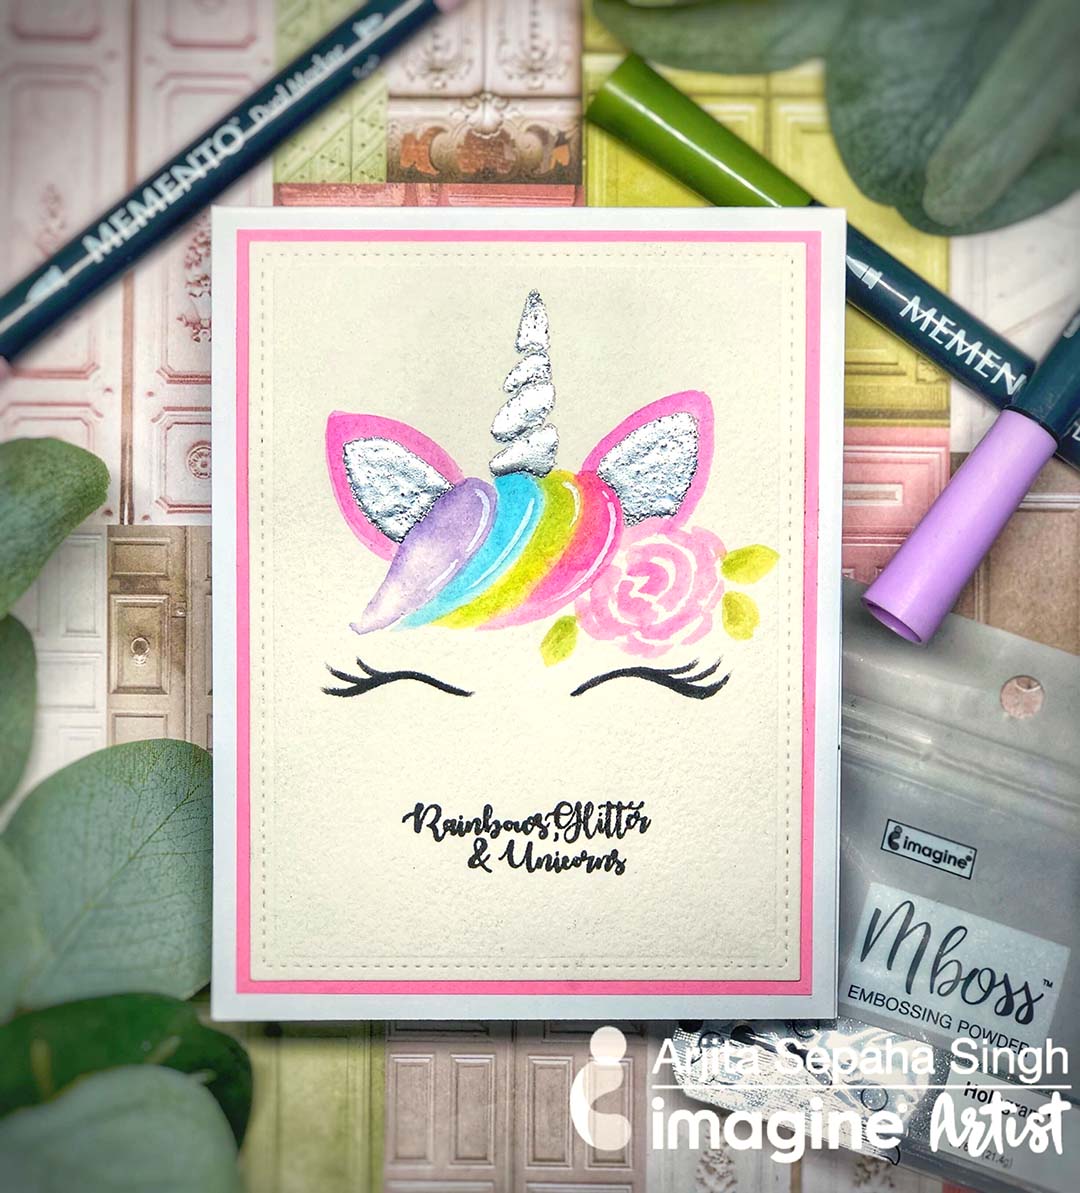 Handdrawn and painted unicorn image on a cute card for birthdays, showers or other greetings.